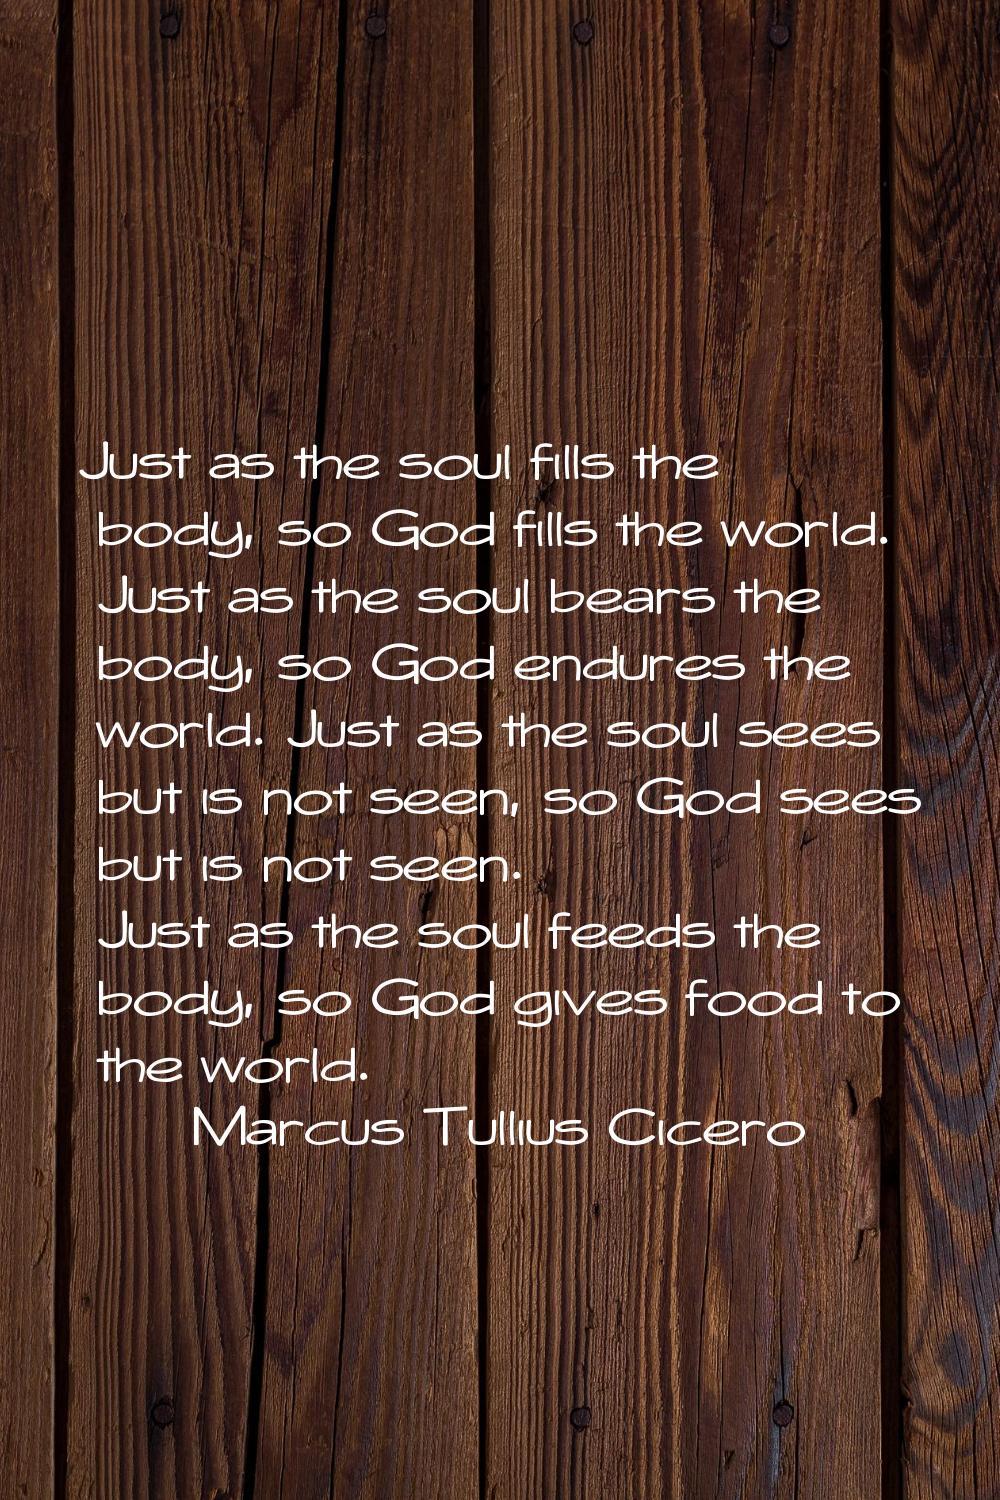 Just as the soul fills the body, so God fills the world. Just as the soul bears the body, so God en